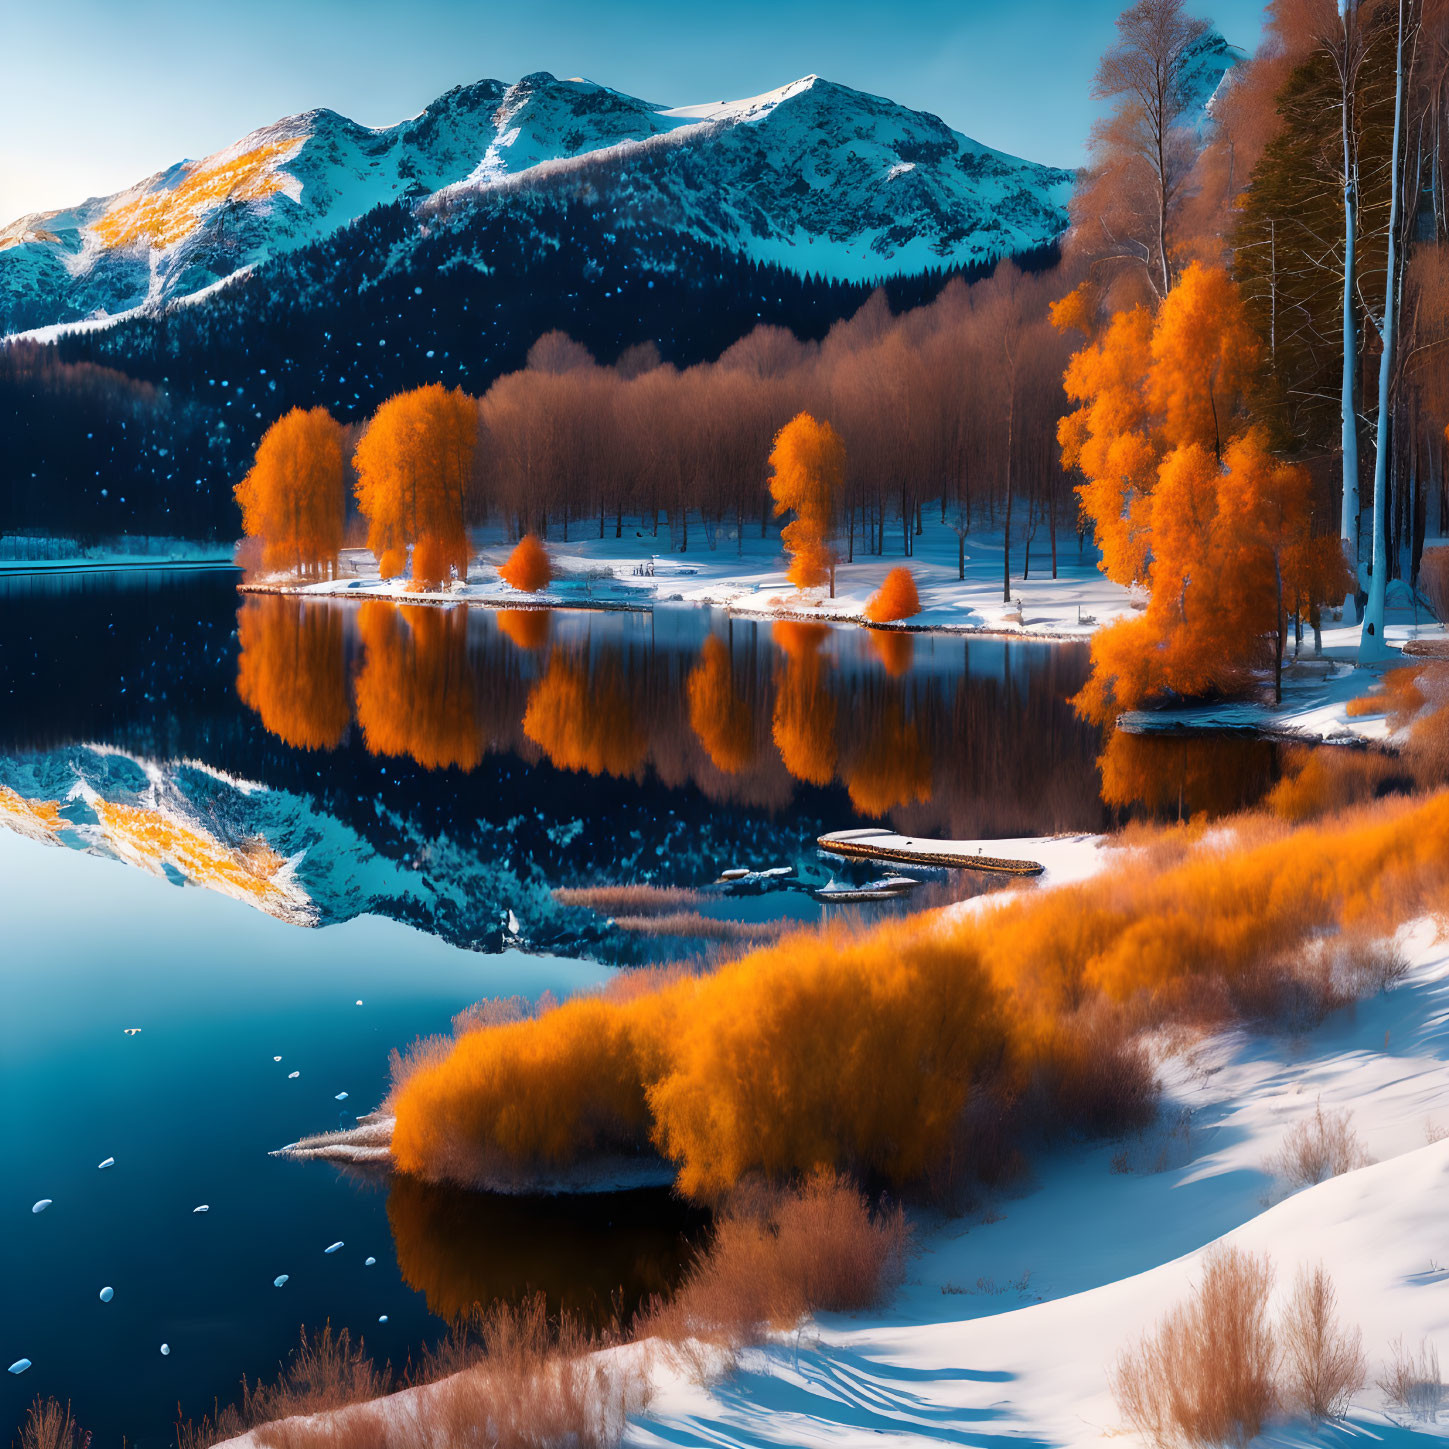 Tranquil Lake Scene with Orange Foliage, Snow-Capped Mountains, and Blue Sky